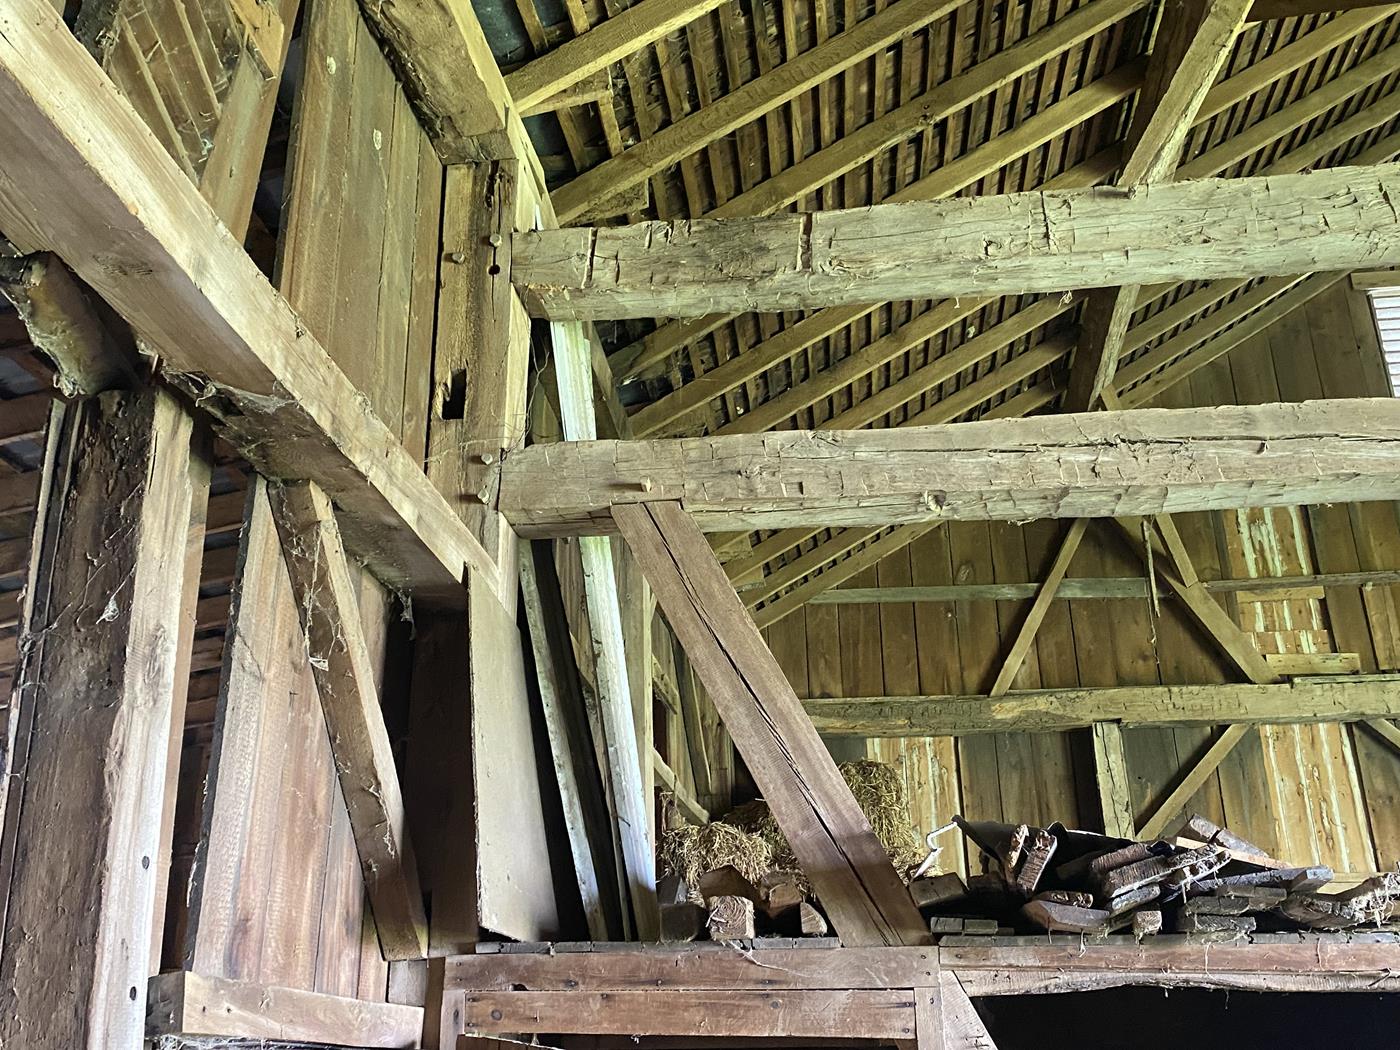 https://www.ohiovalleybarnsalvage.com/images/Marlatt Historic Ohio Barn Frame For Sale - Your Source For Reclaimed Barn Siding